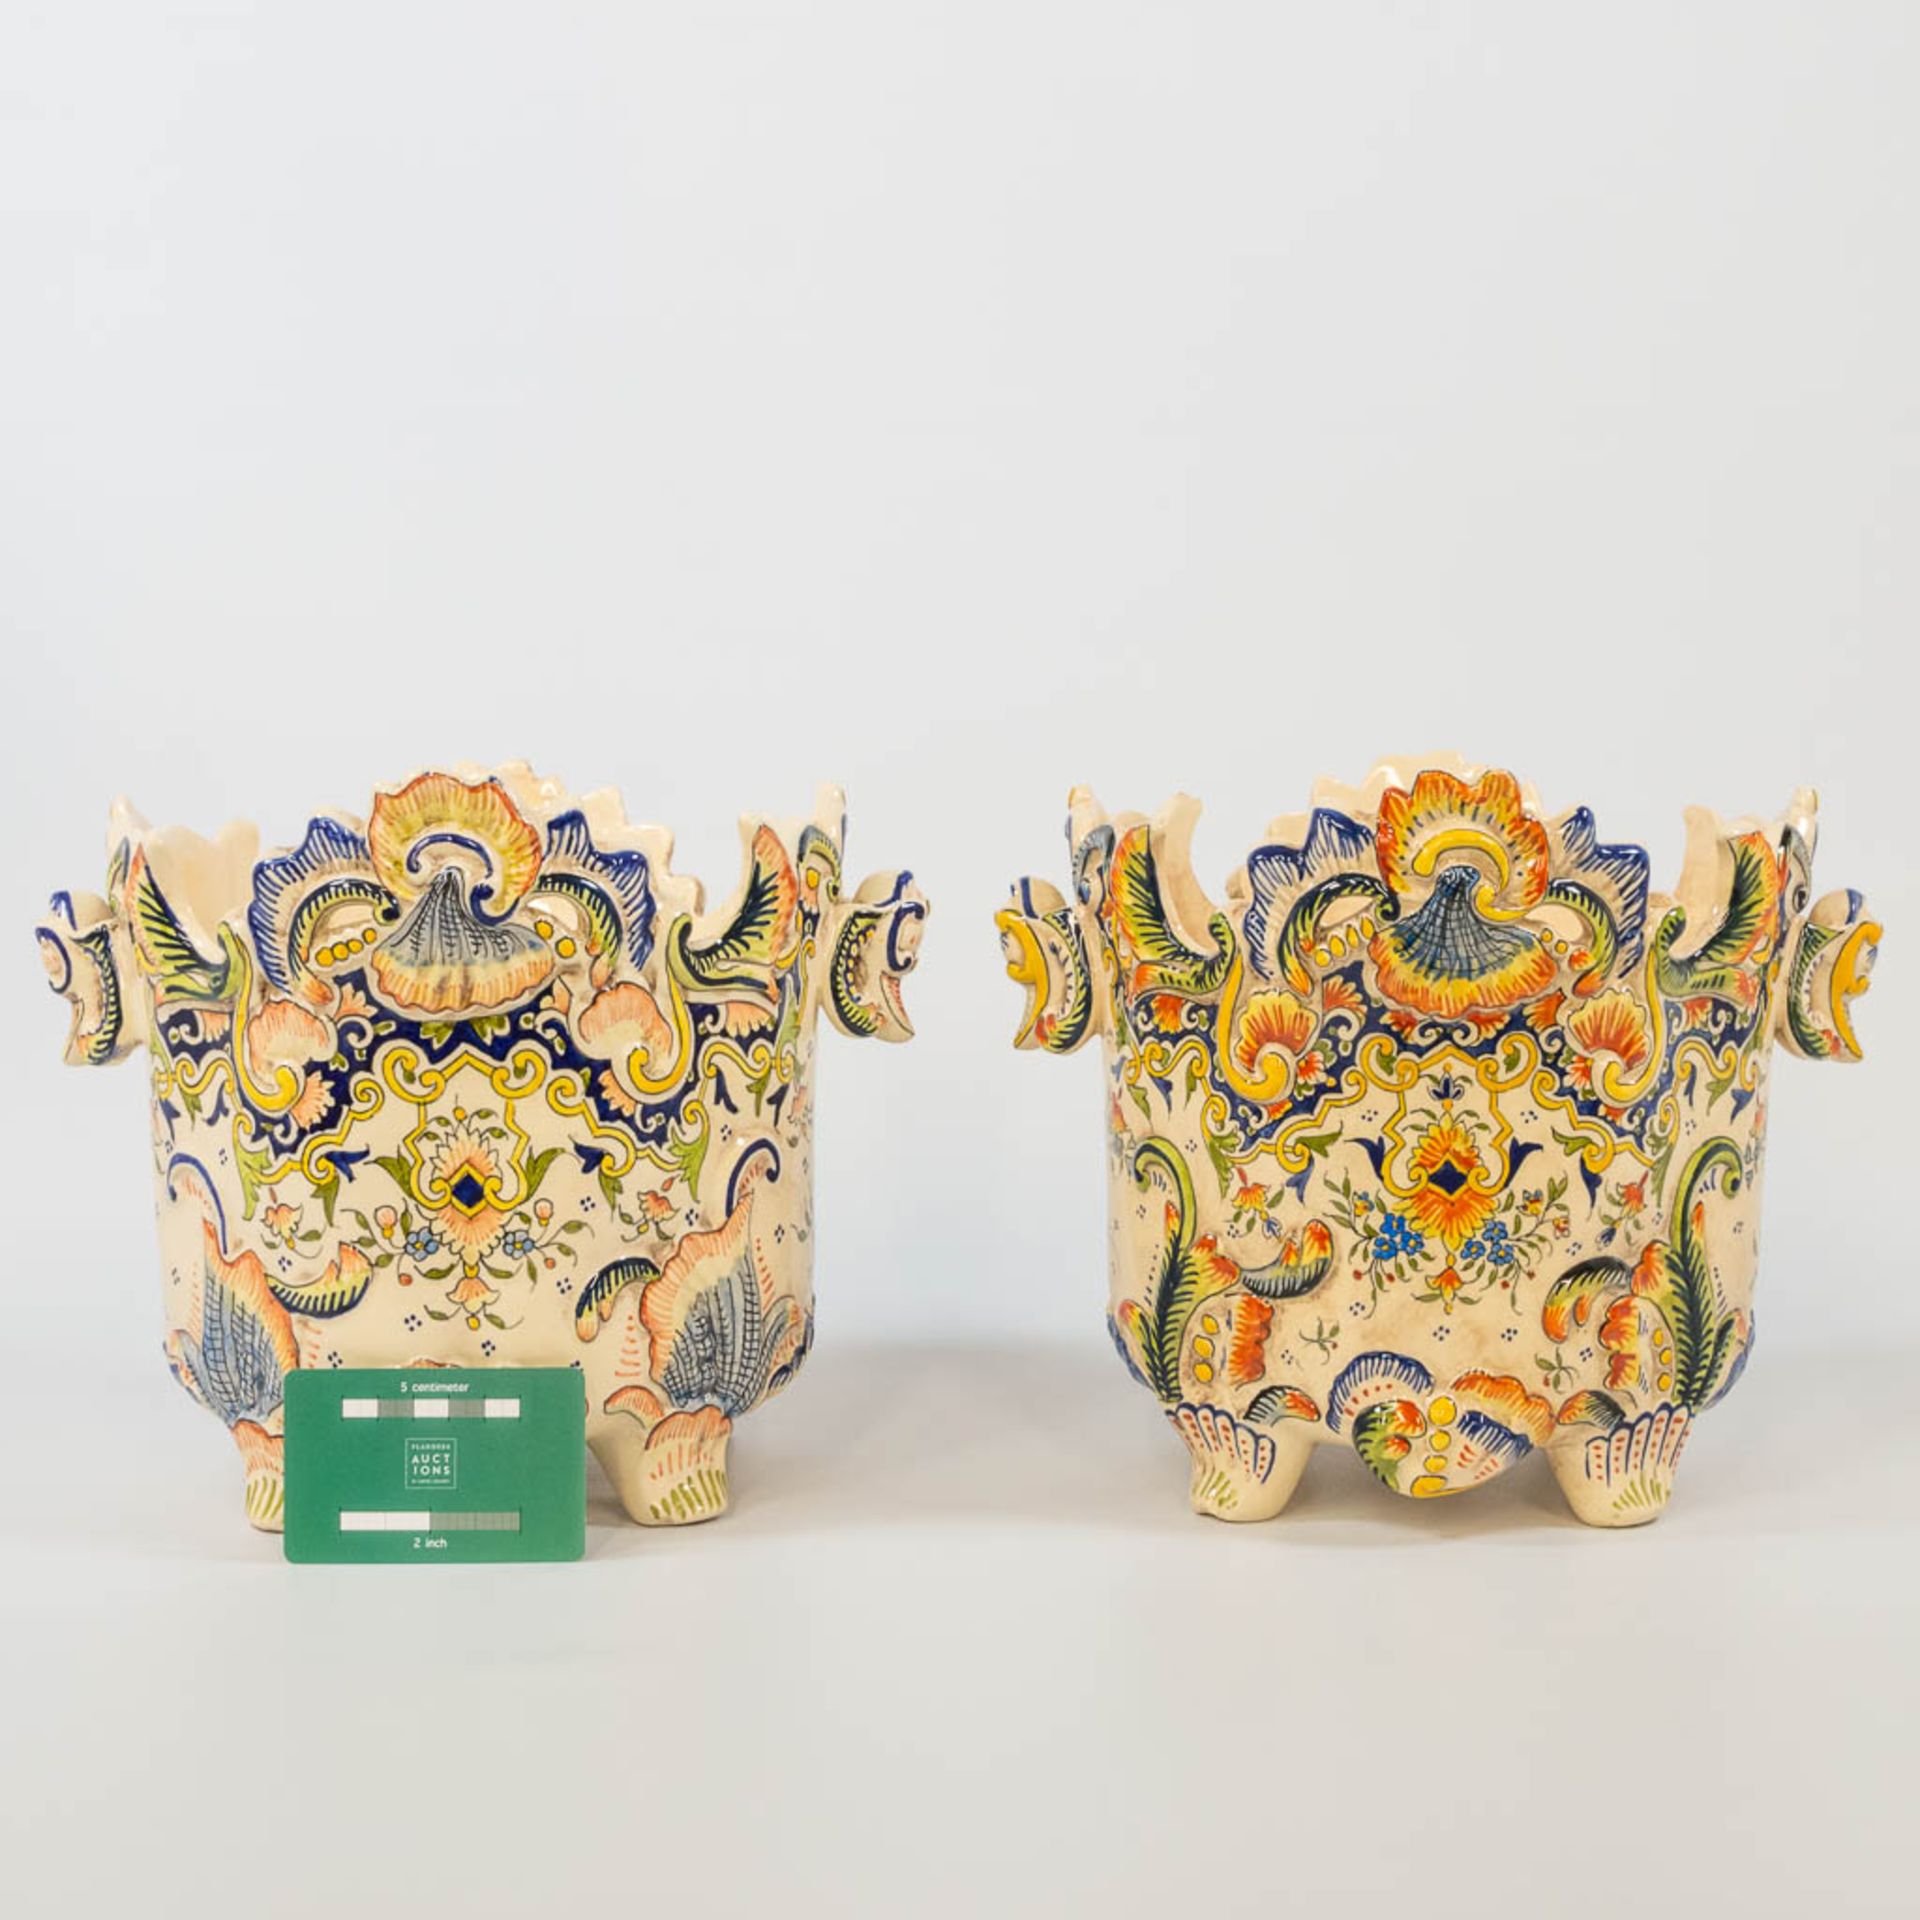 A pair of cache-pots with hand-painted decor, made of faience in Rouen, France. (23 x 27 x 22 cm) - Bild 7 aus 17